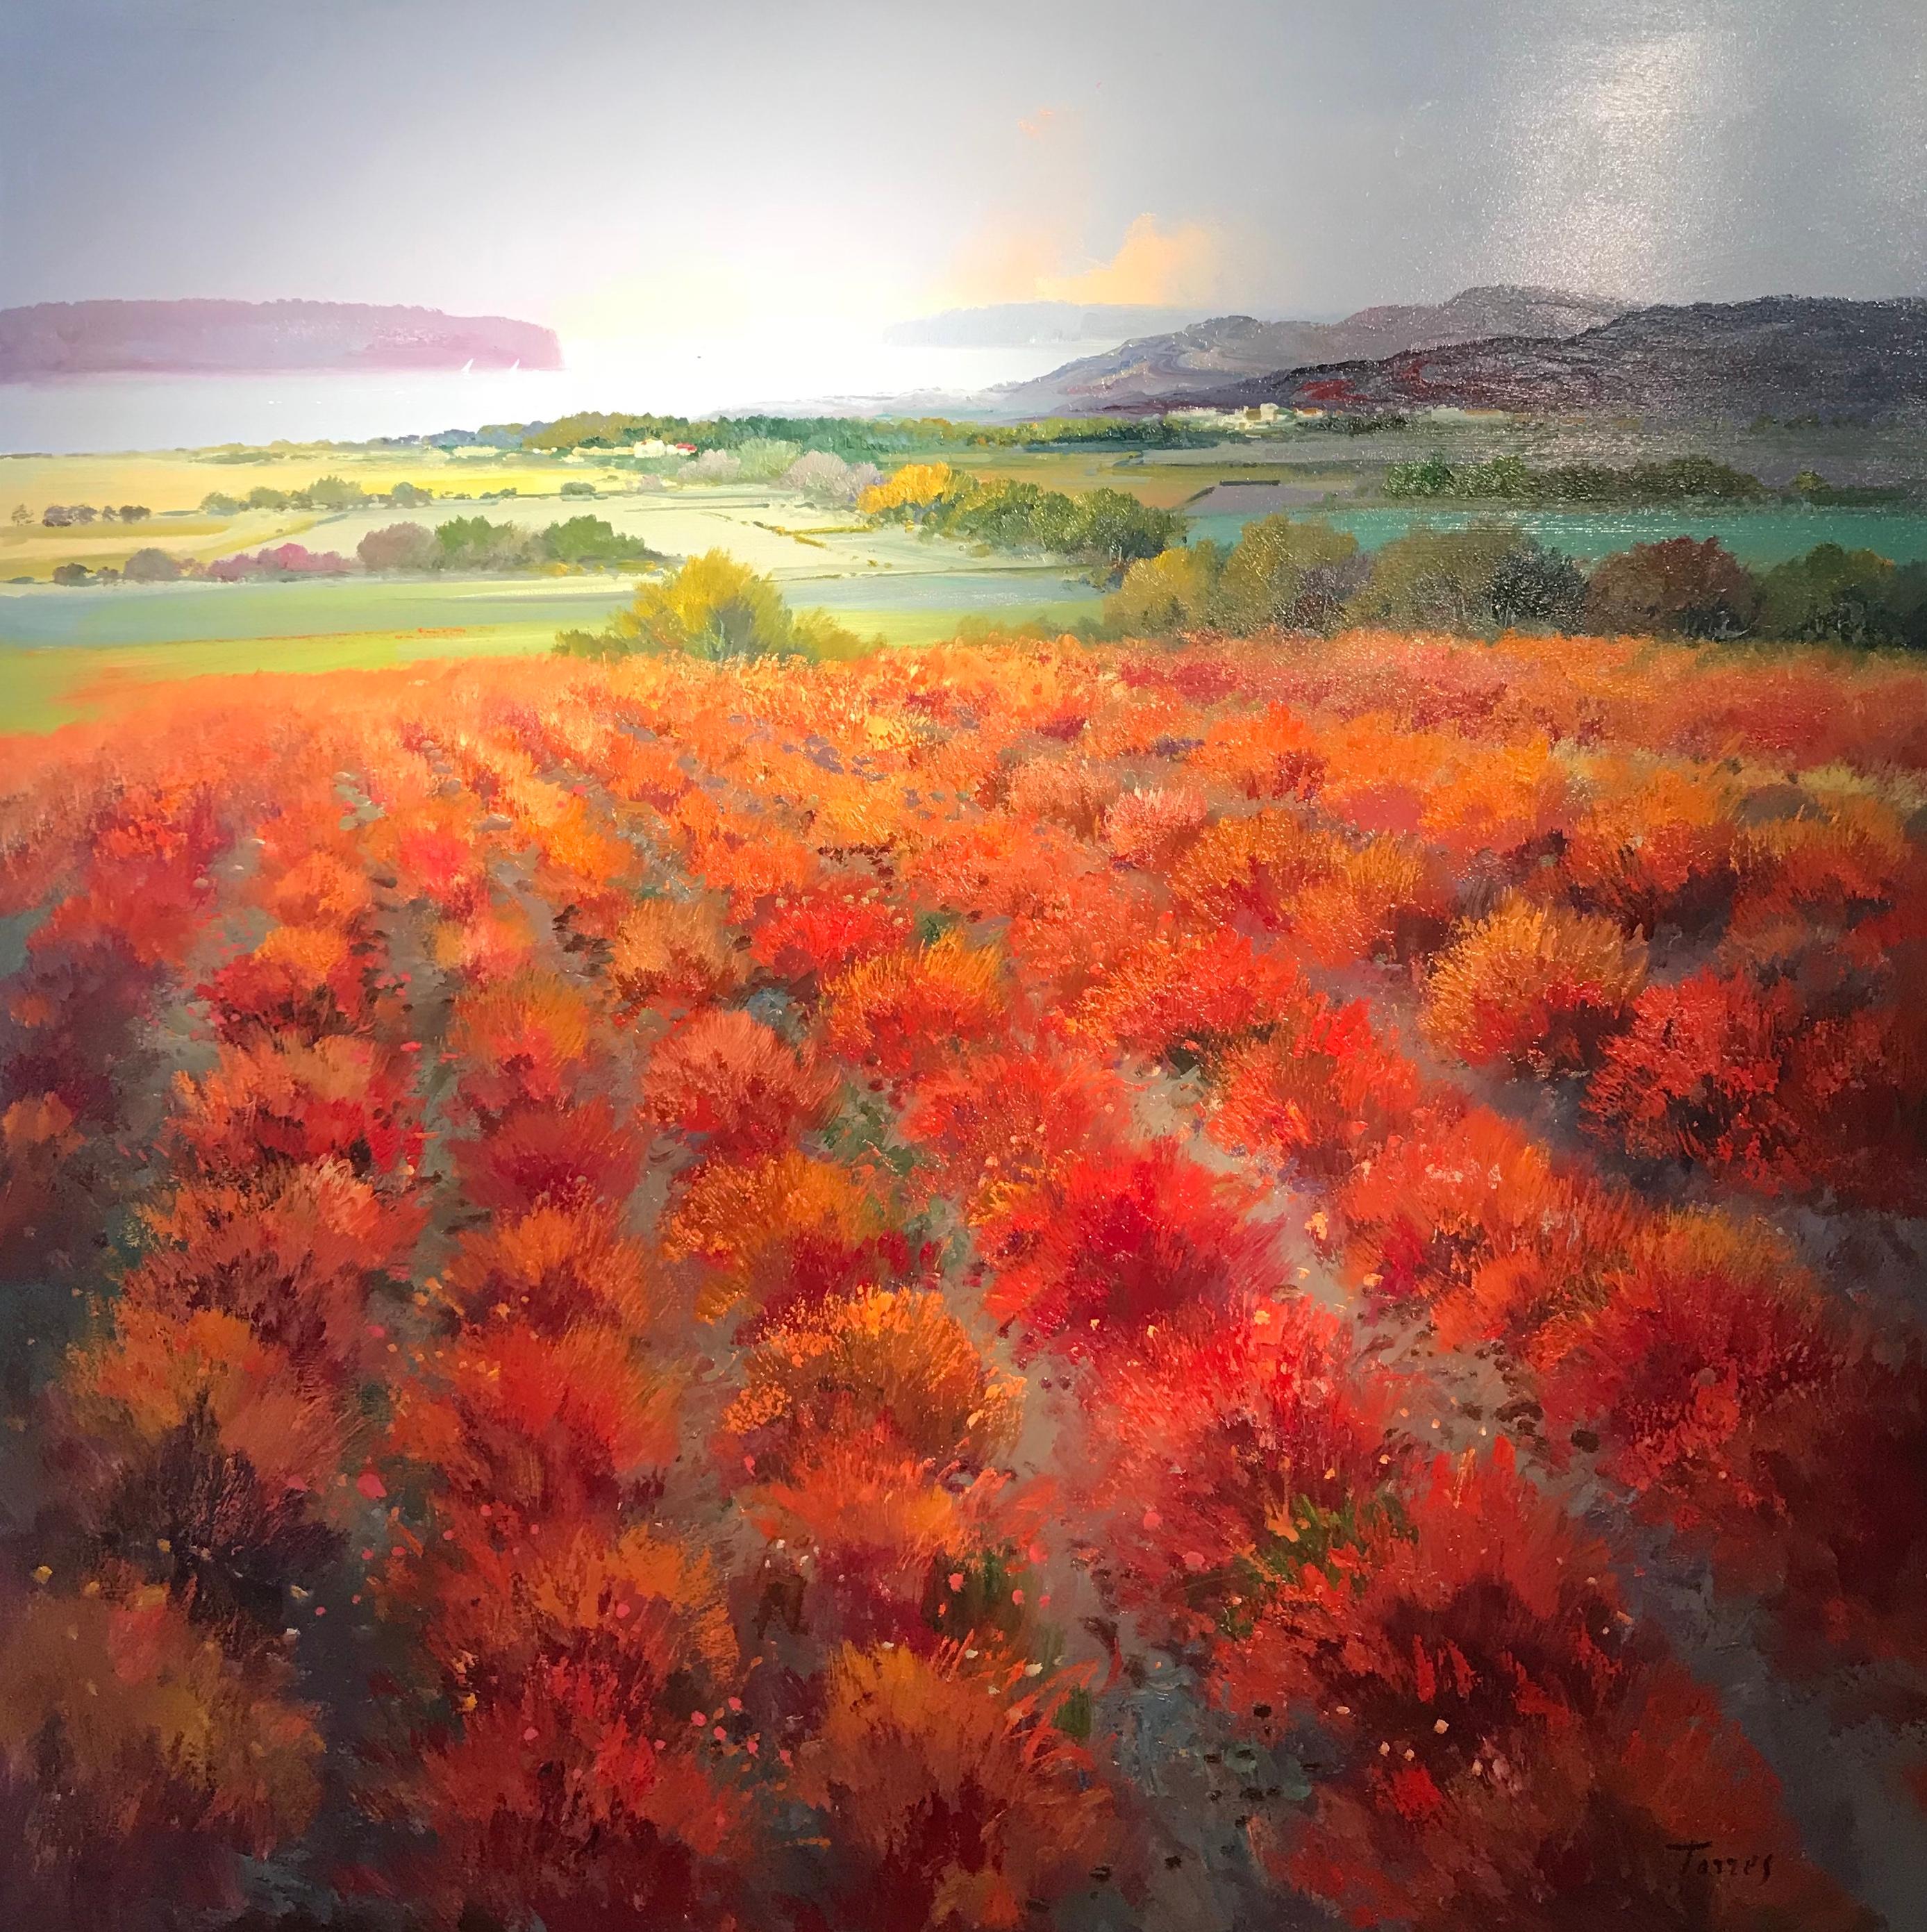 'Red Fields' by Torres is a stunning rural landscape with rolling hills down to the sea. The beautiful vivid colour palette of the foreground is strong and makes for a composition that is fiery and bold. A huge pop of red and burnt orange jump off